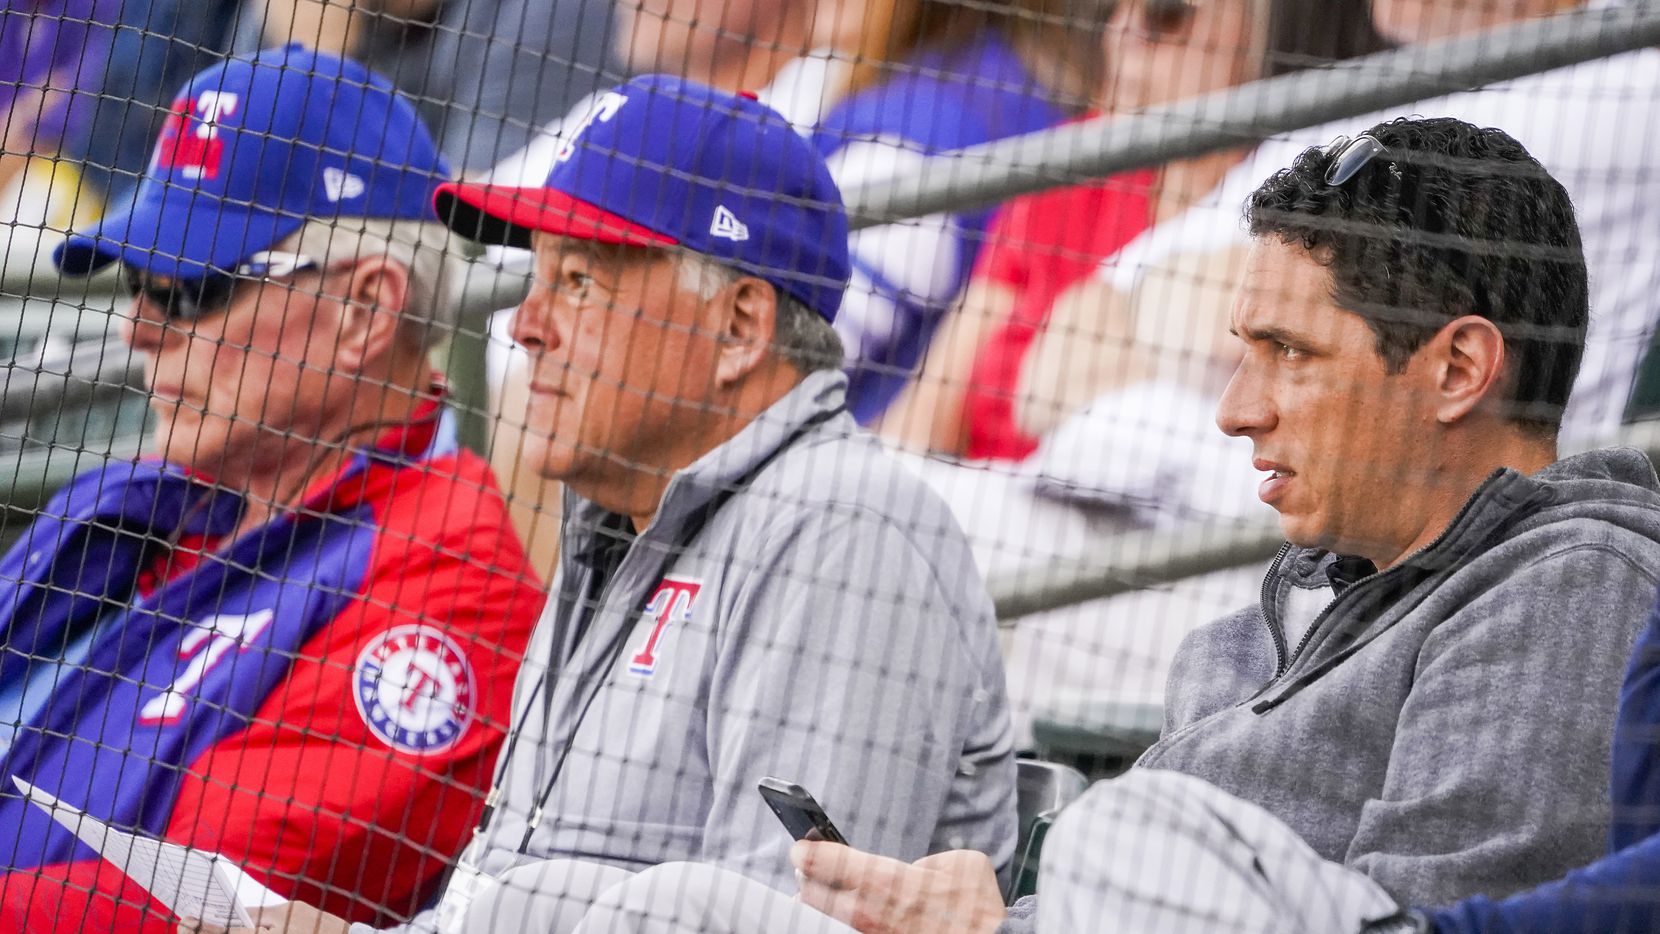 Texas Rangers general manager Jon Daniels (right) watches with co-chairman and managing partner Ray C. Davis (left) and chairman, ownership committee and chief operating office Neil Leibman (center) during the third inning of a spring training game against the Chicago Cubs at Surprise Stadium on Thursday, Feb. 27, 2020, in Surprise, Ariz.